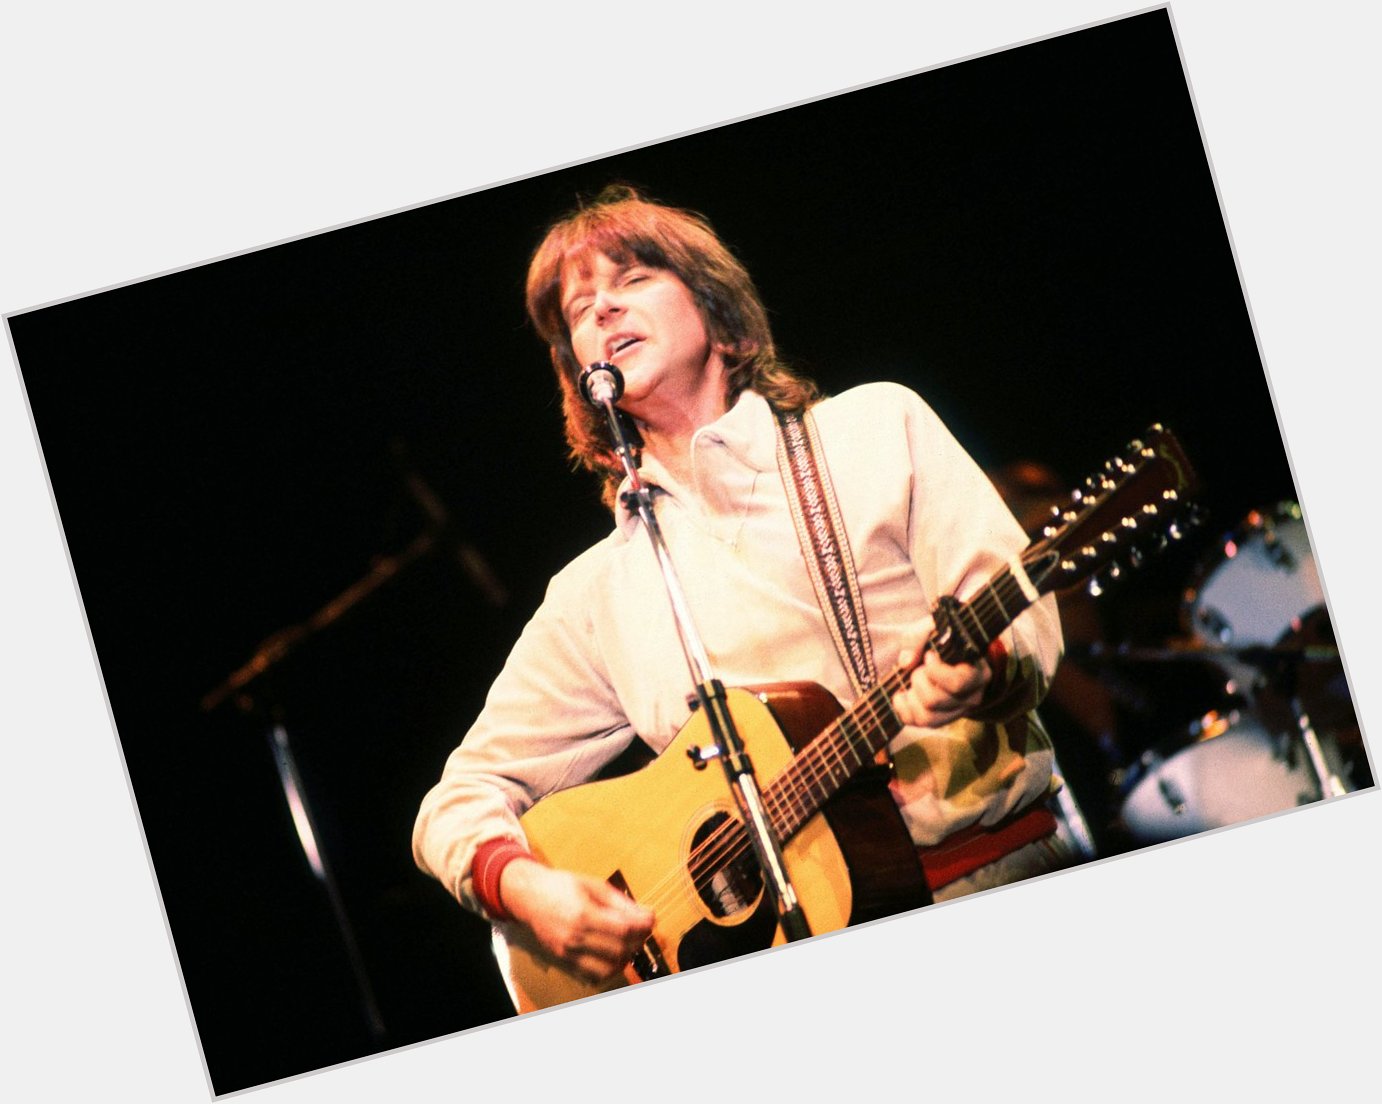 Happy Birthday to Randy Meisner, formerly of The Eagles.  Original vocalist on Take It To The Limit and many others. 